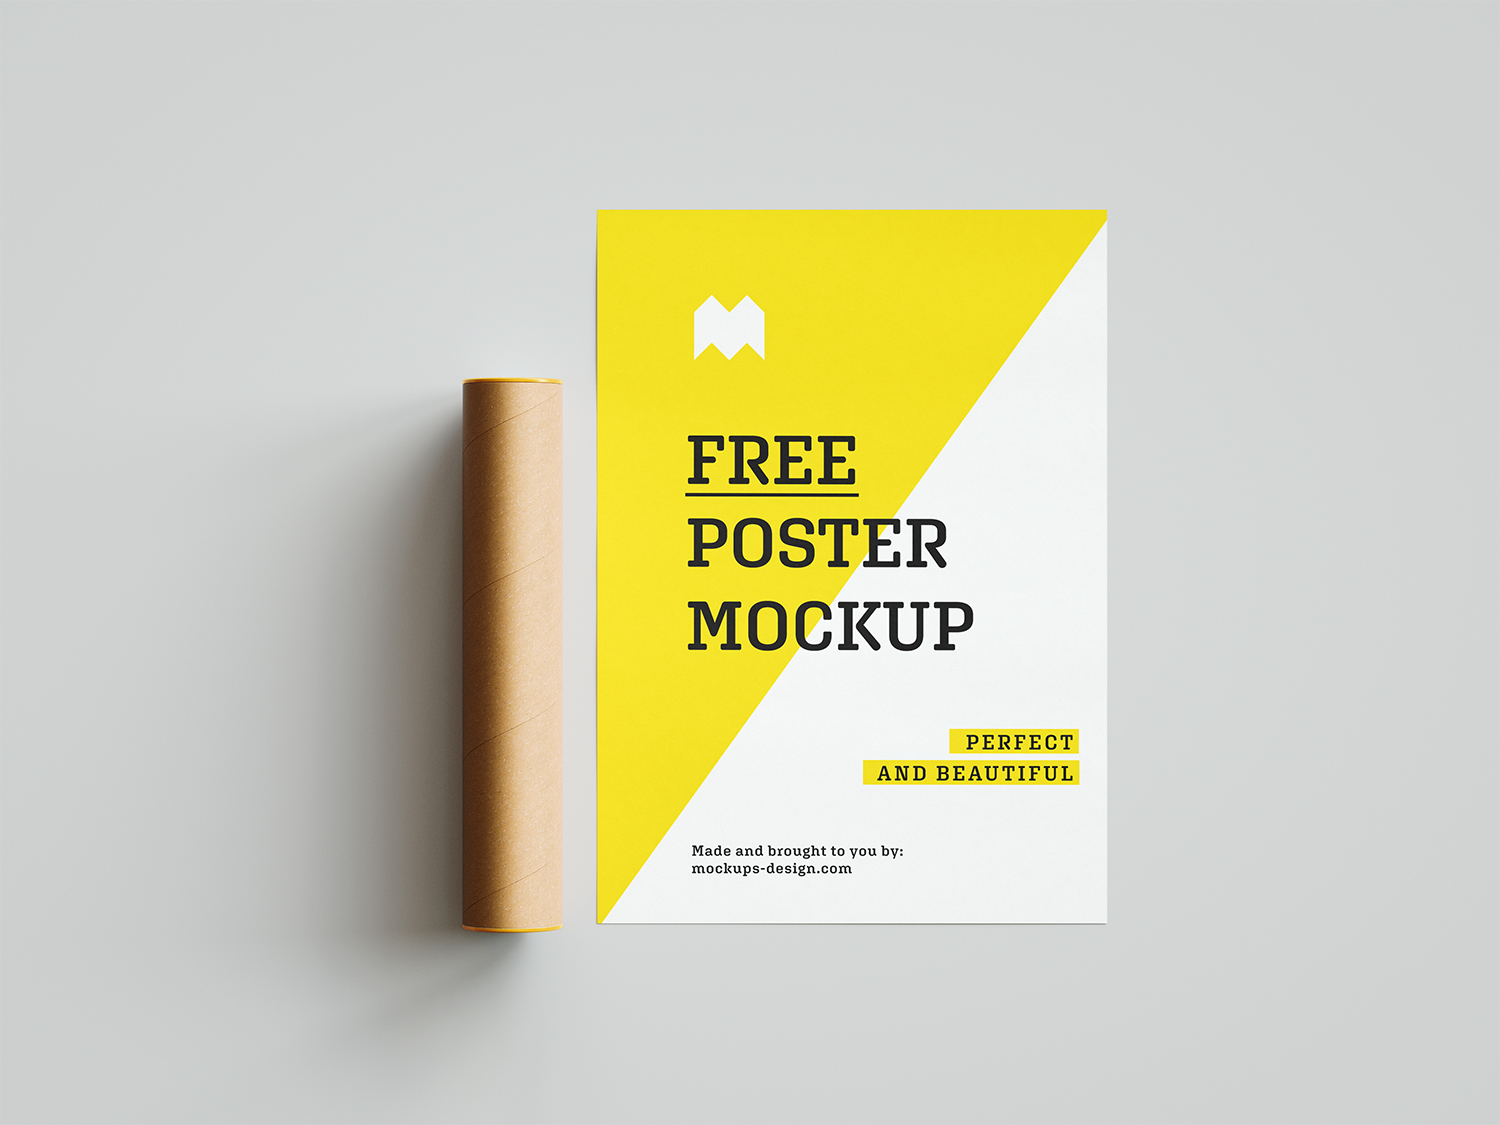 Download Free Poster Mockup With A Paper Tube Free Mockup PSD Mockup Templates